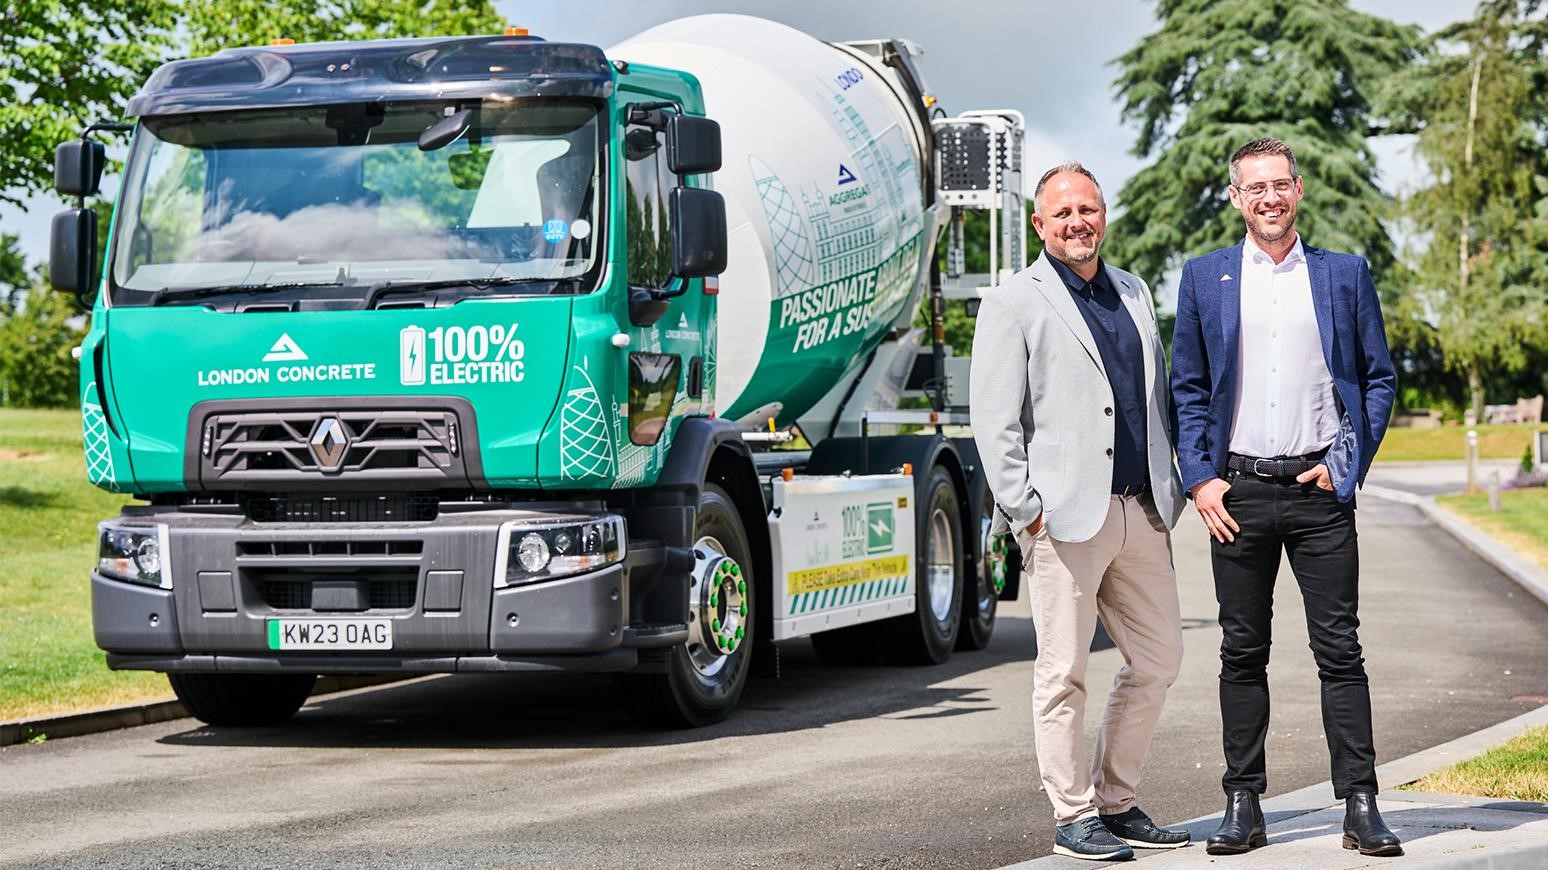 Aggregate Industries Paves The Way To A Carbon-Free Future With Renault Electric Concrete Mixer